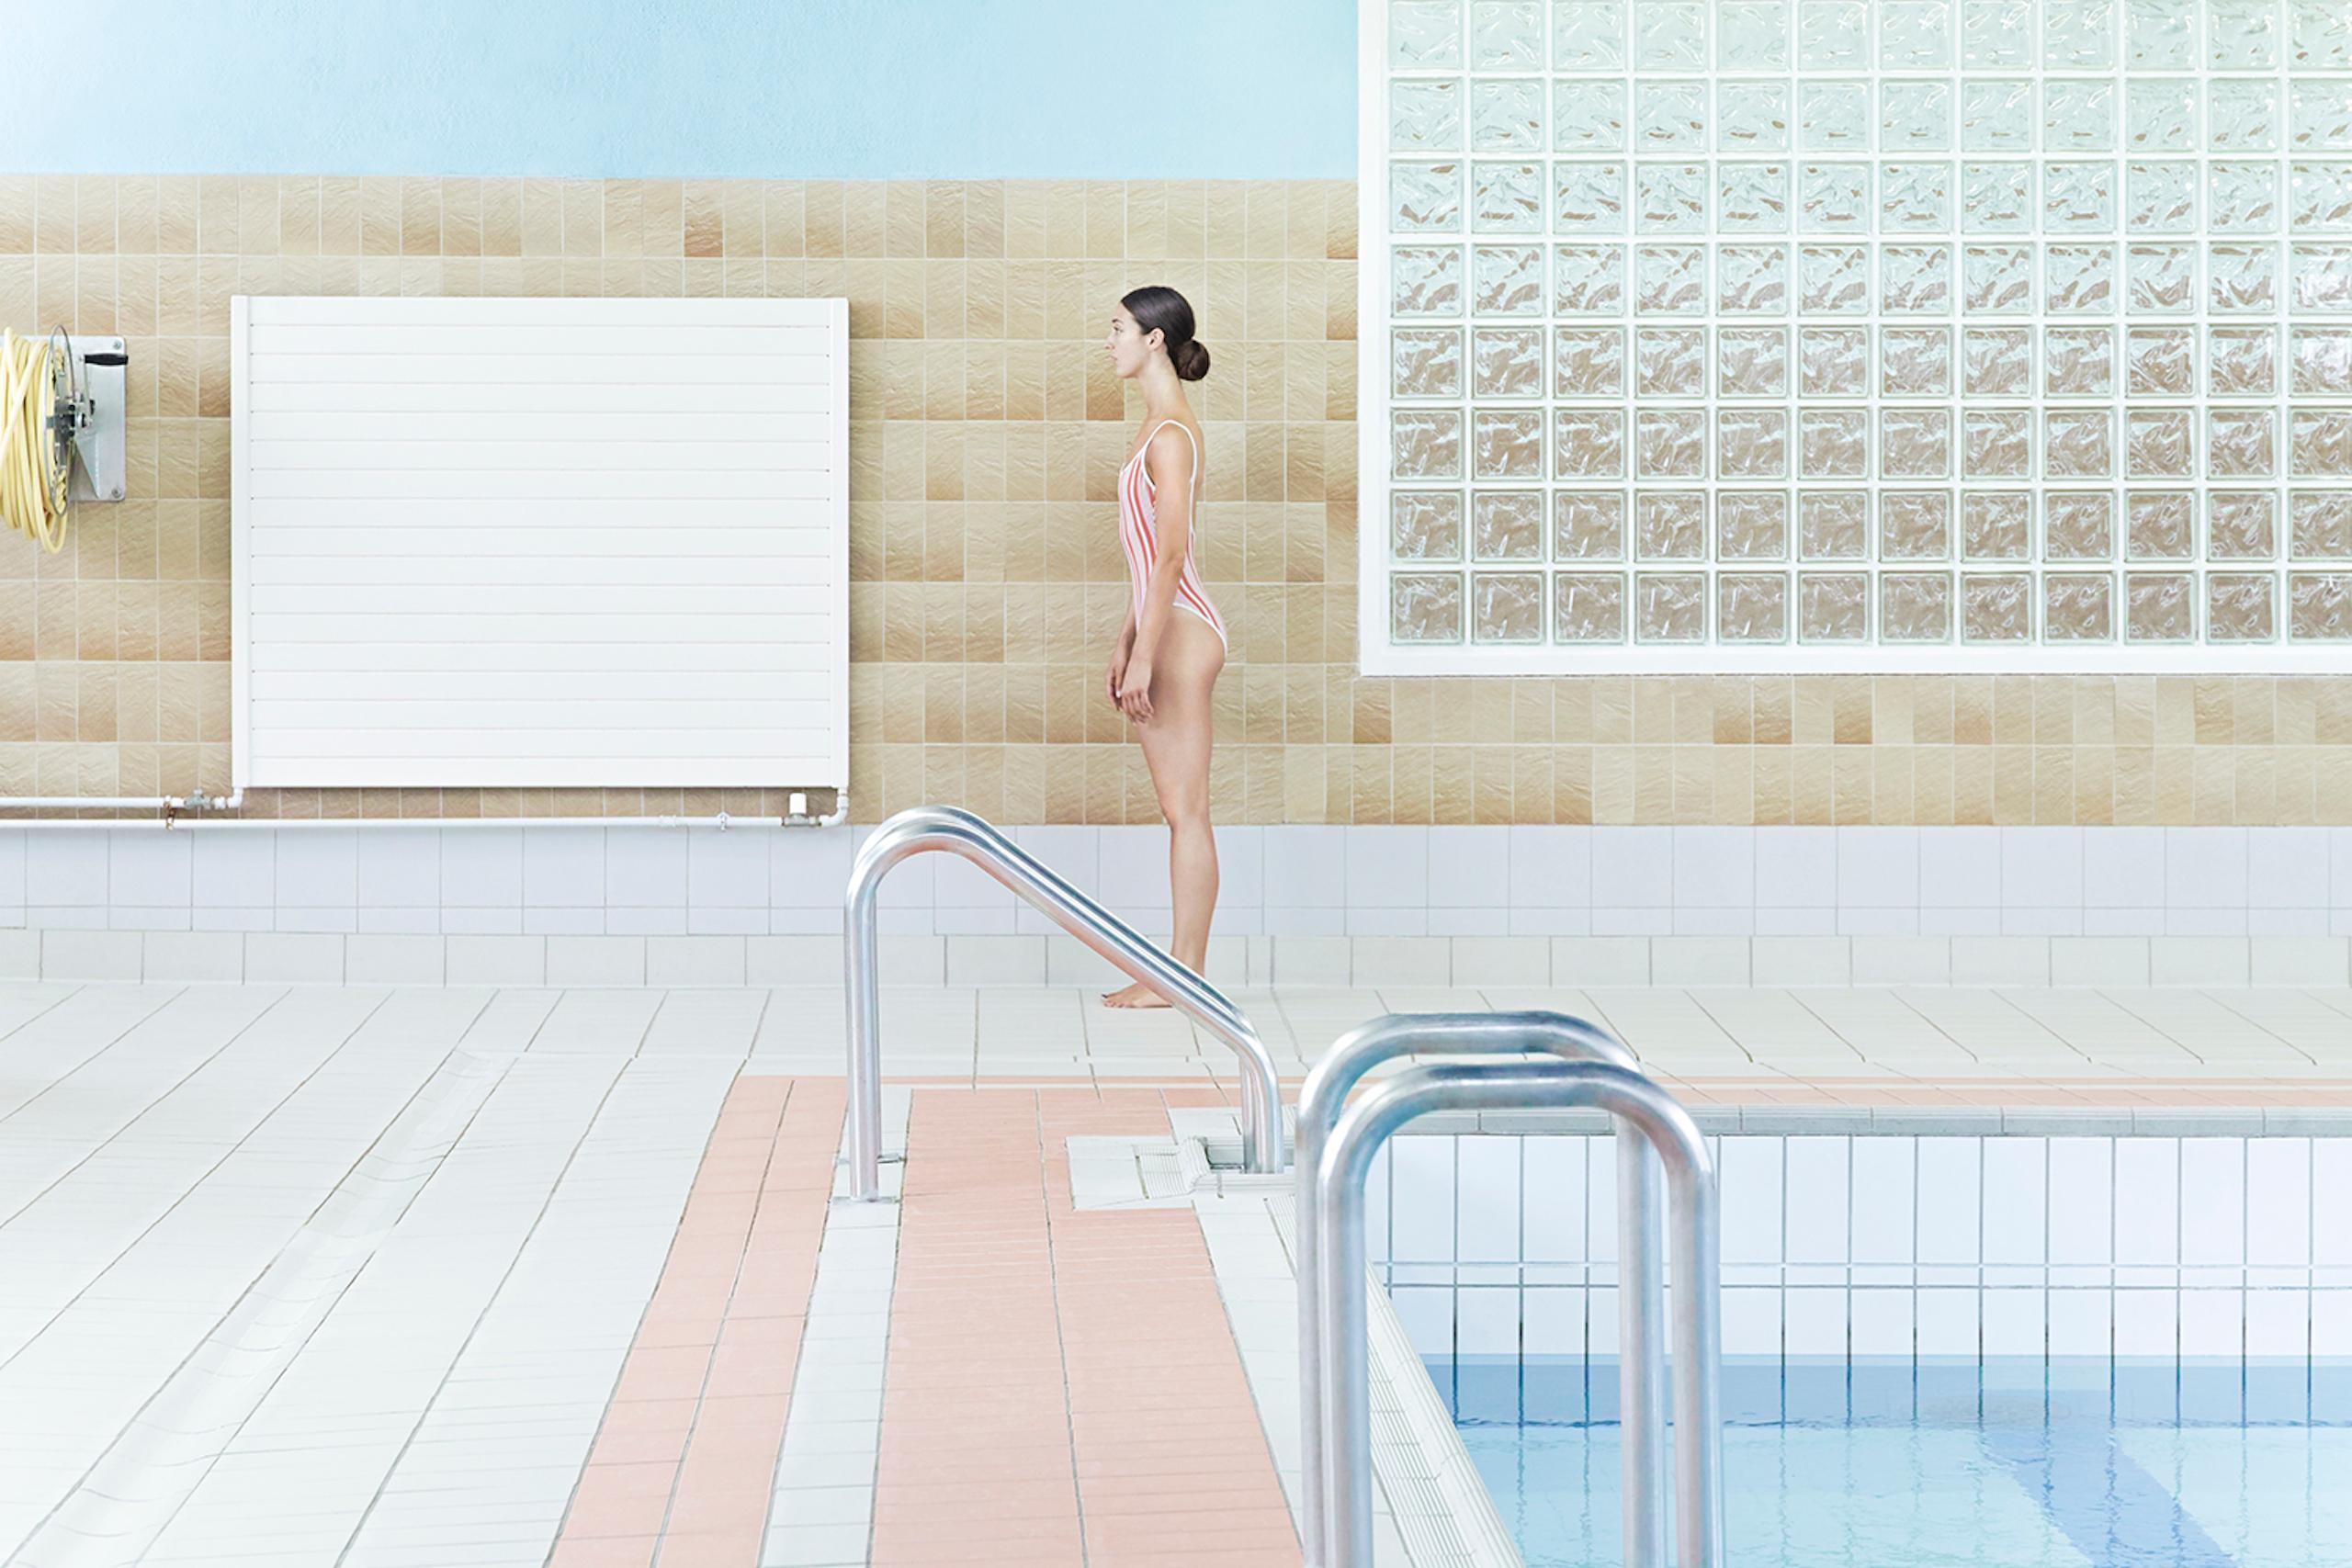 The pool is a photograph by French contemporary artist Camille Brasselet. 

This photograph is sold unframed as a print only. It is available in 2 dimensions:
*50 cm × 75 cm (19.7" × 29.5"), edition of 15 copies
*80 cm × 120 cm (31.5" × 47.2"),